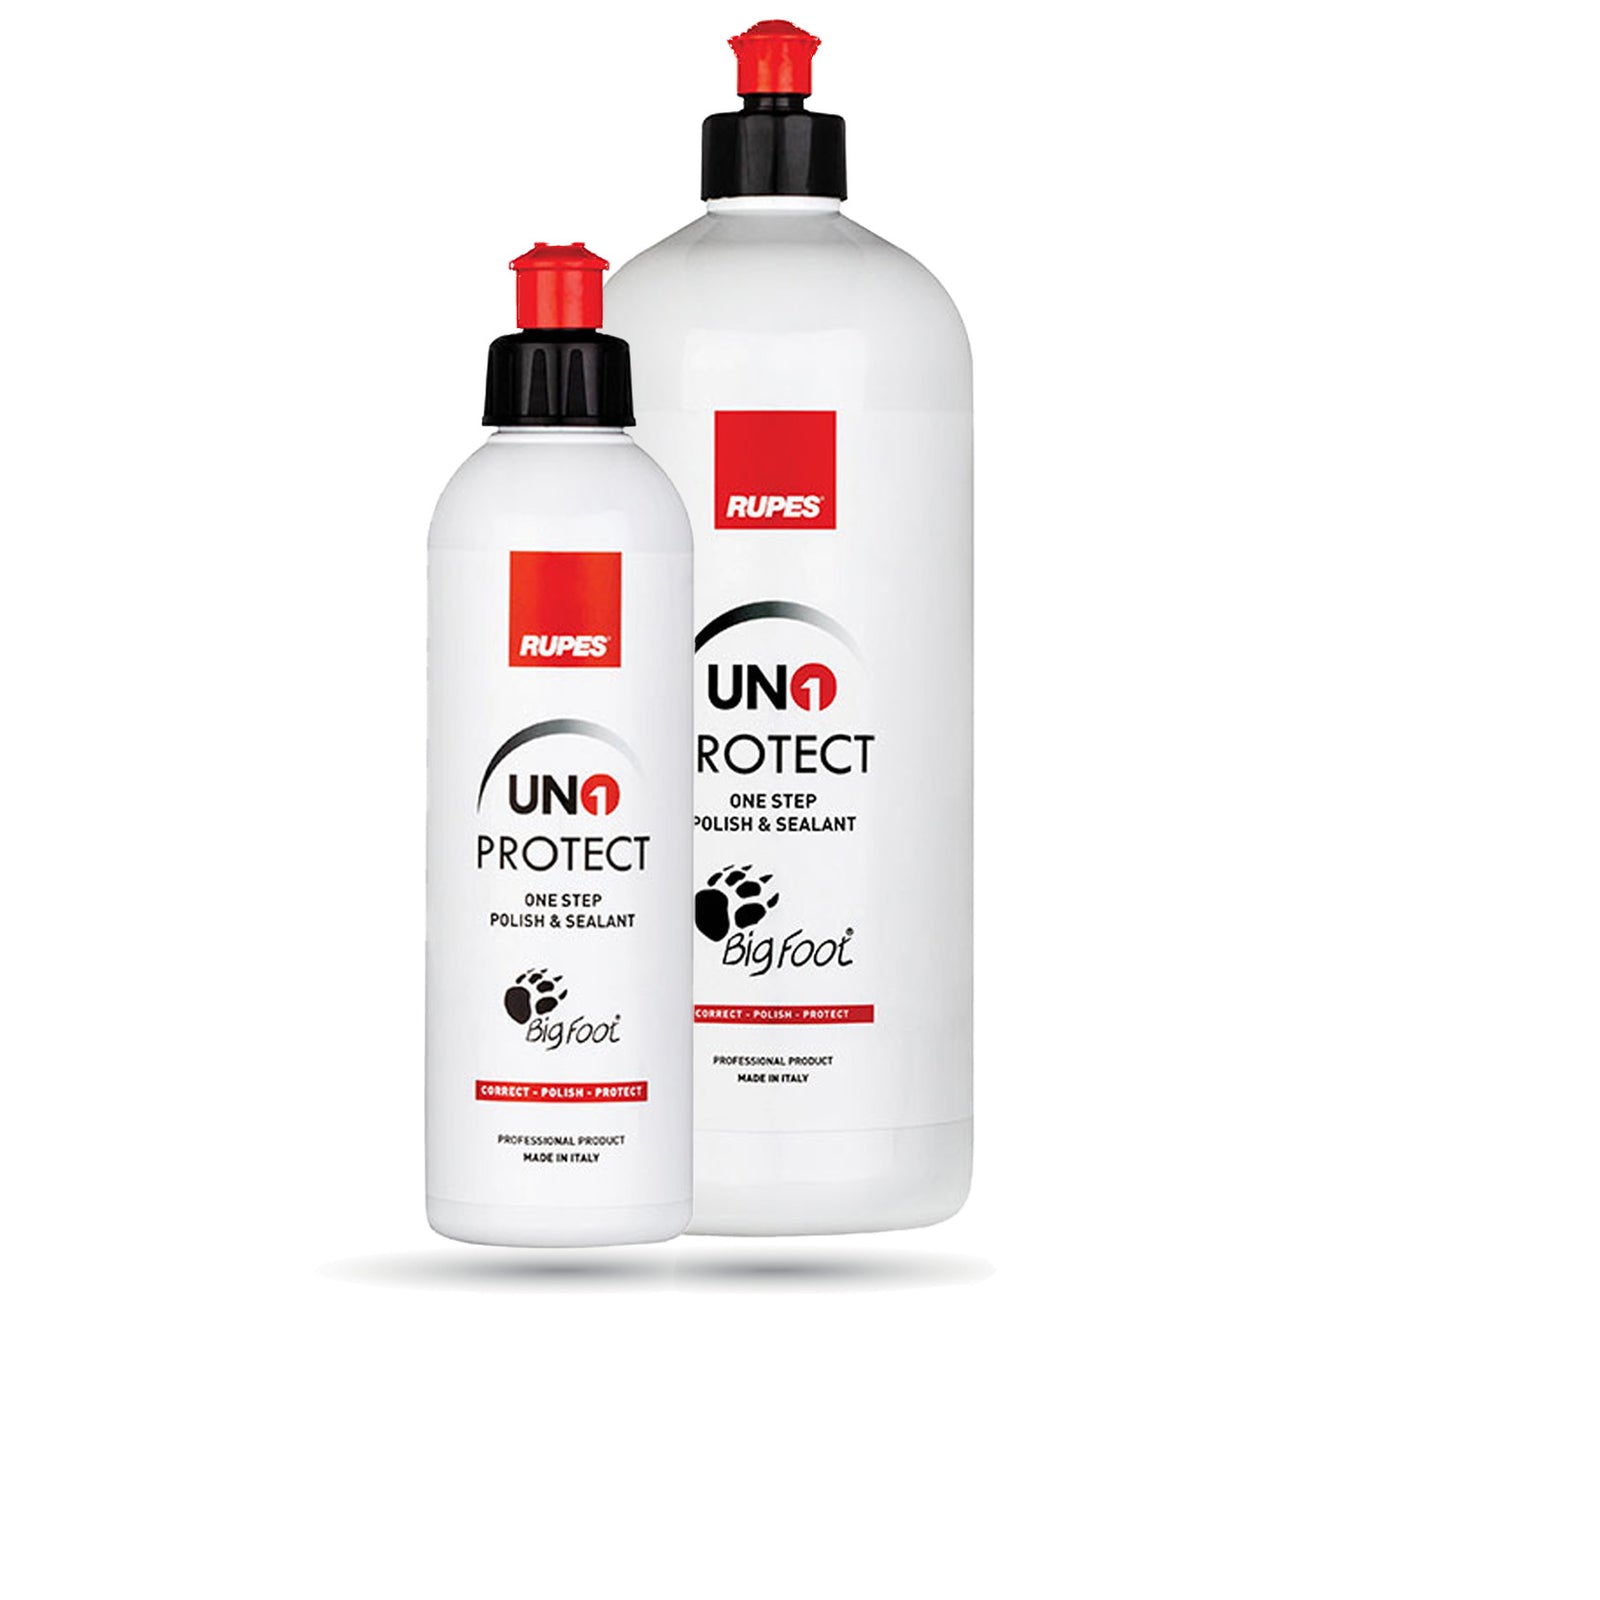 UNO PROTECT All-in-One Polish